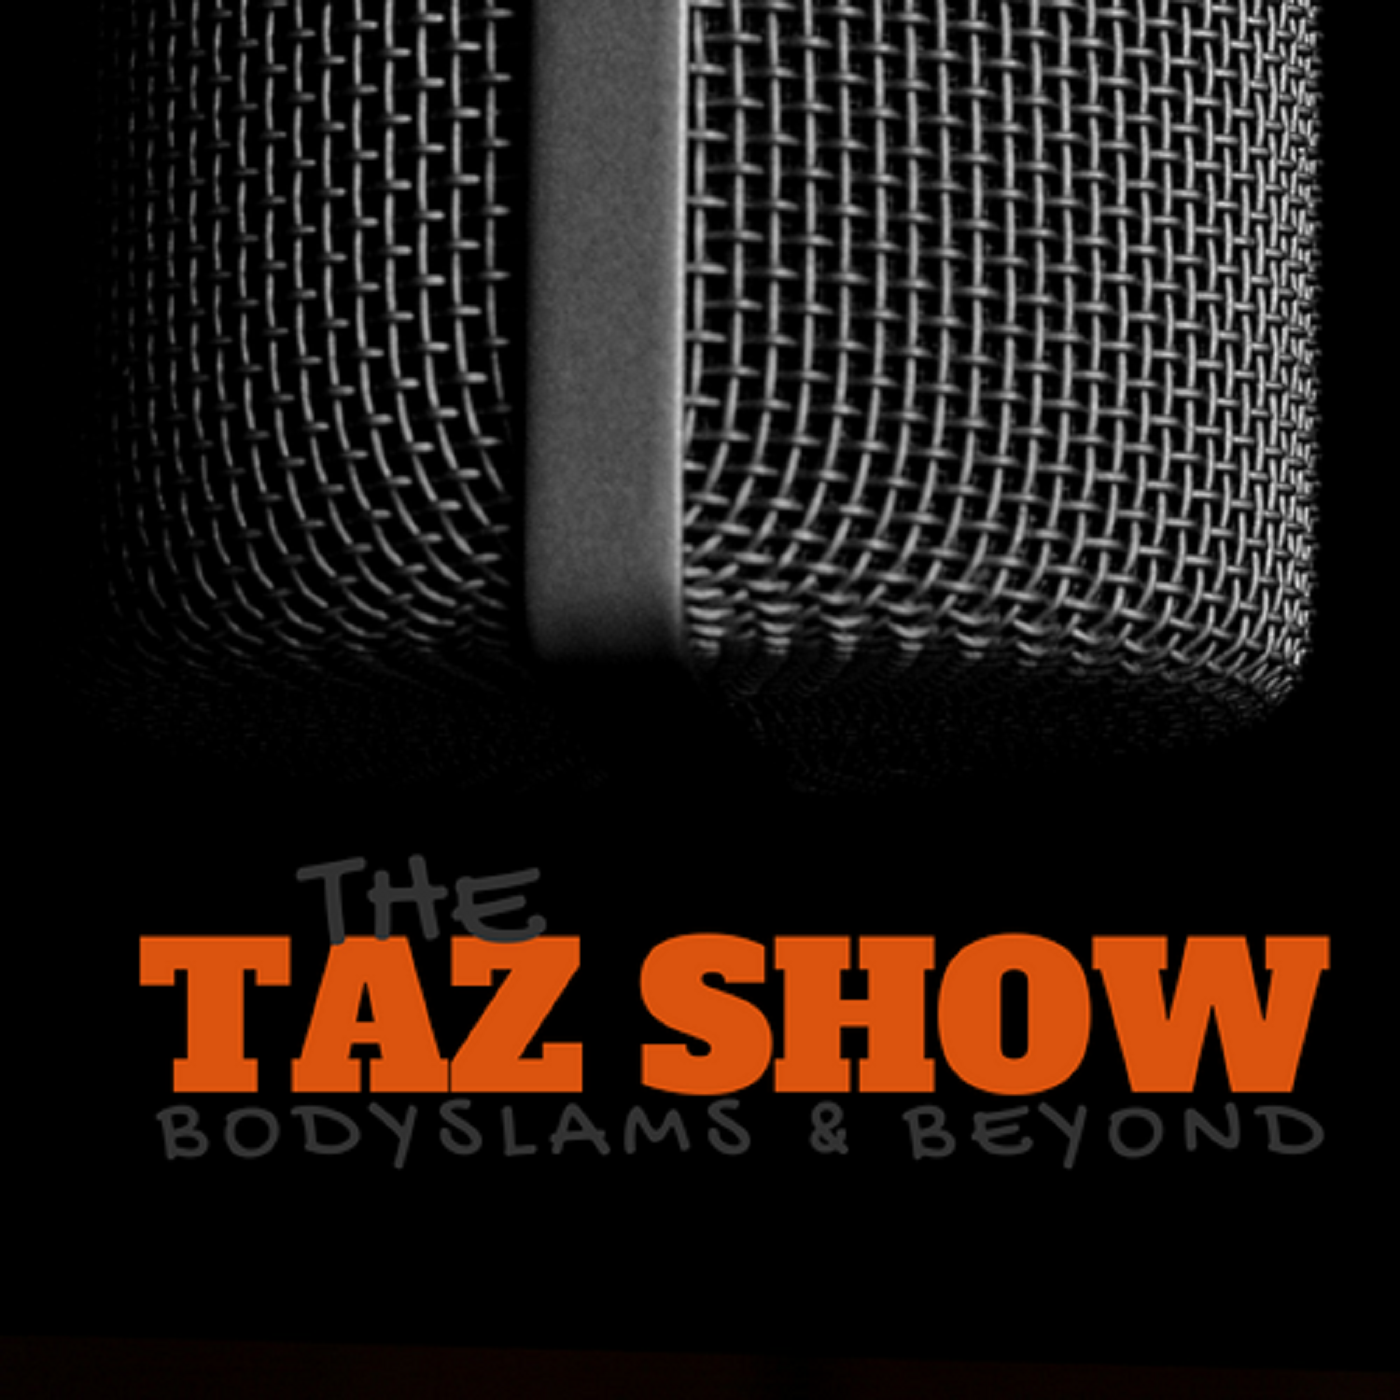 The Taz Show! Wednesday, October 7th, 2015